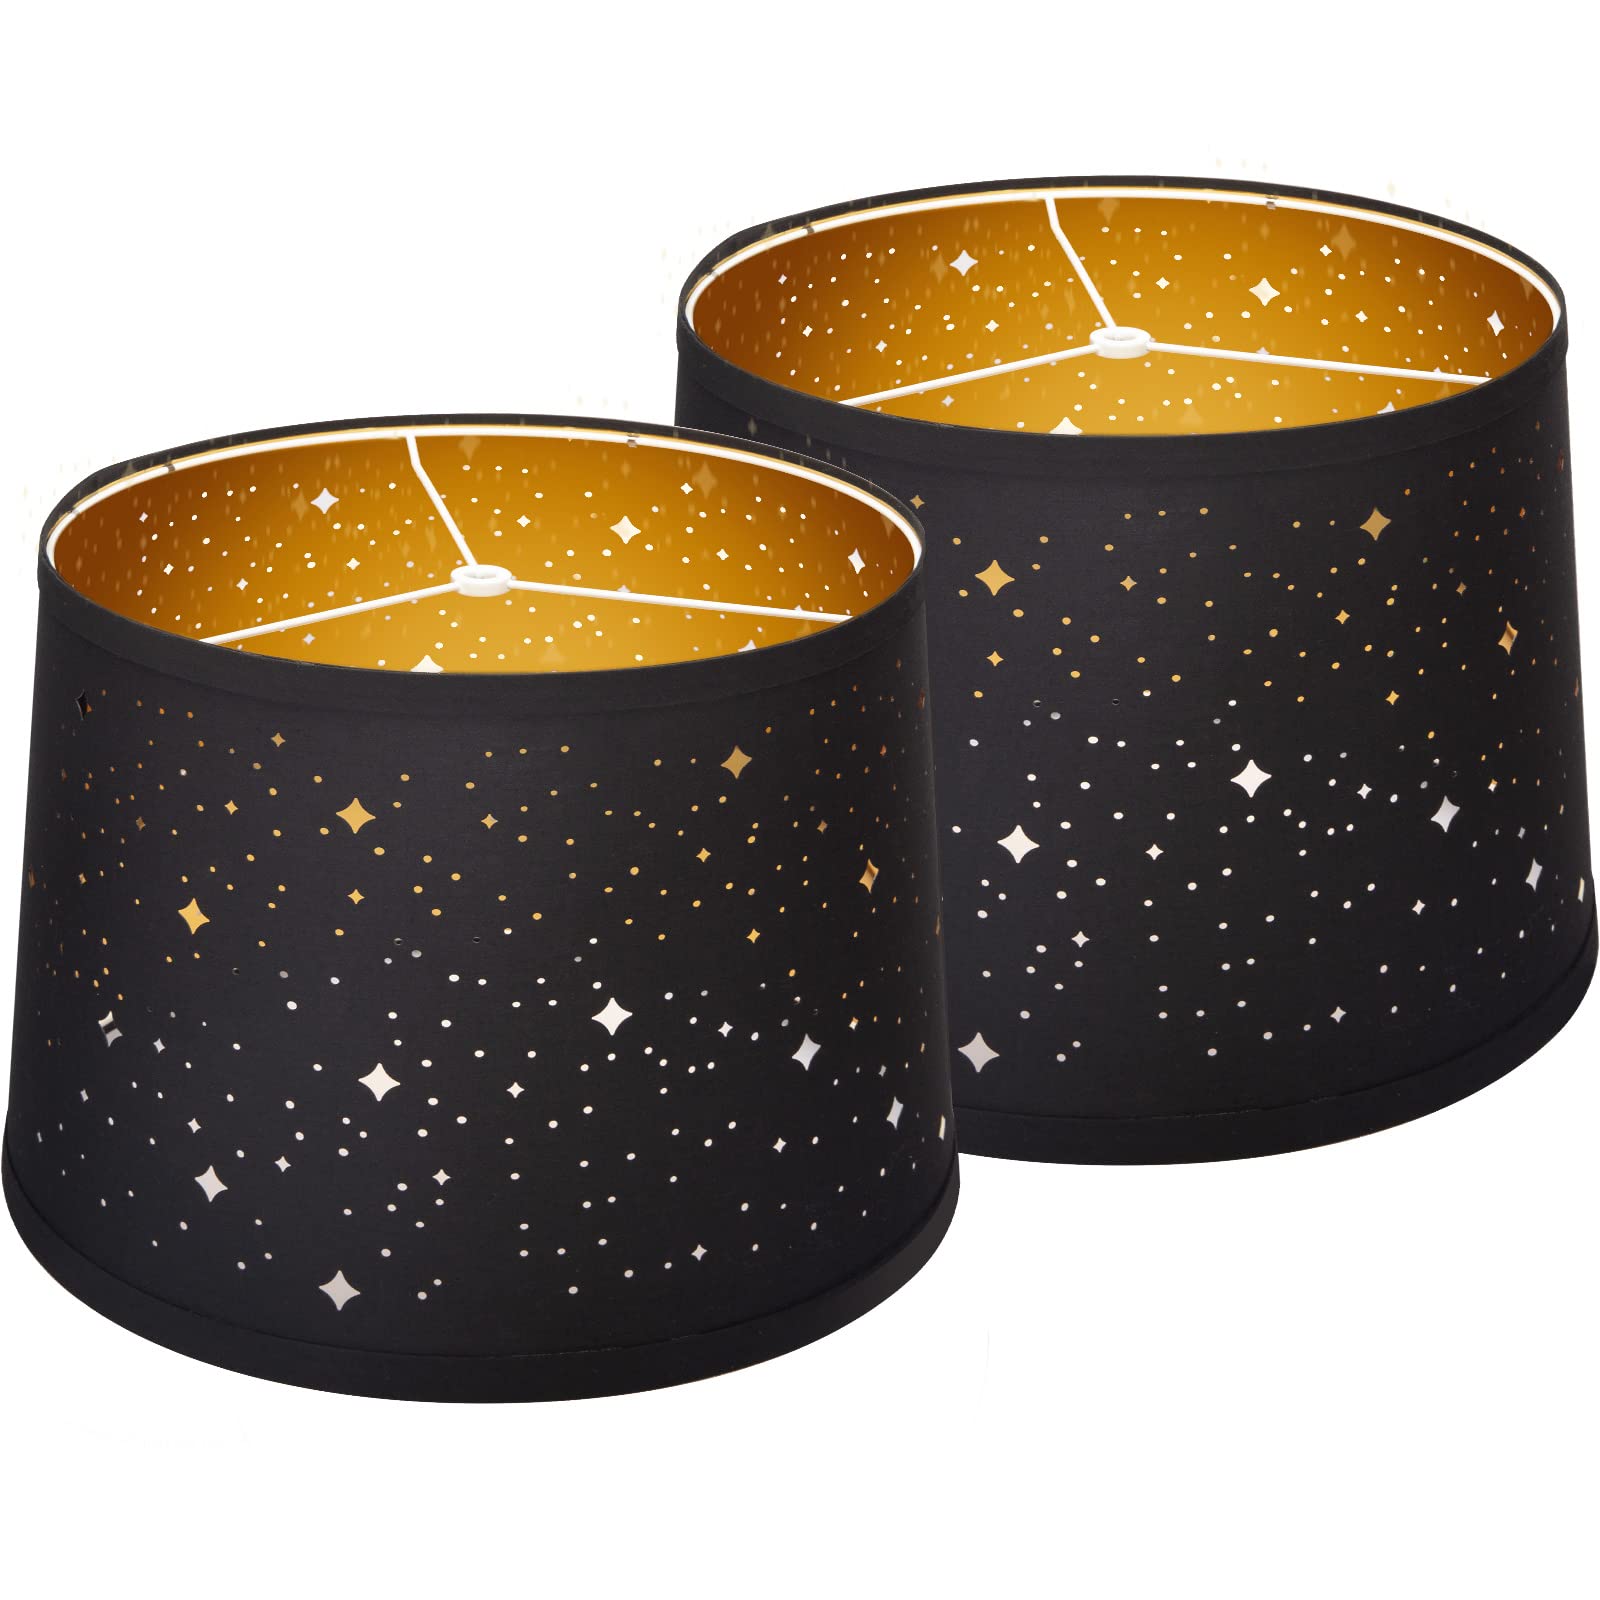 Seaside Village Black Lampshades Set of 2, Drum Lampshades with Sky Stars Design, 11.6" x 12.6" x 9.8" Inches Lampshades for Table Lamp, Floor L